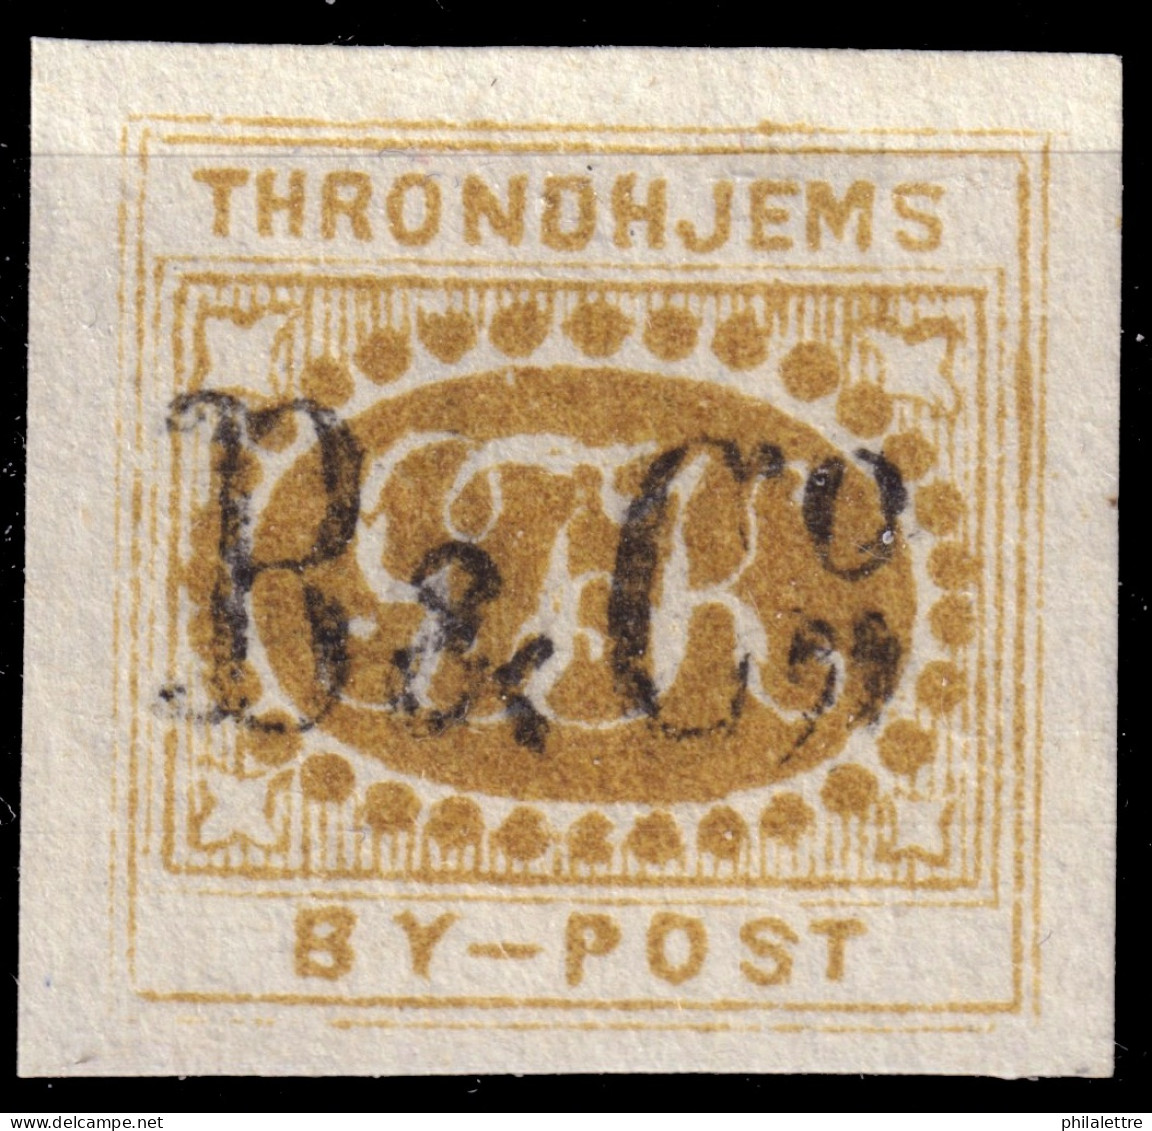 NORVÈGE / NORWAY - Braekstad Local Post TRONDHJEM (Trondheim) 1sk Ochre With B&C° O/P (type 4 Reprint, 1872) - No Gum - Local Post Stamps